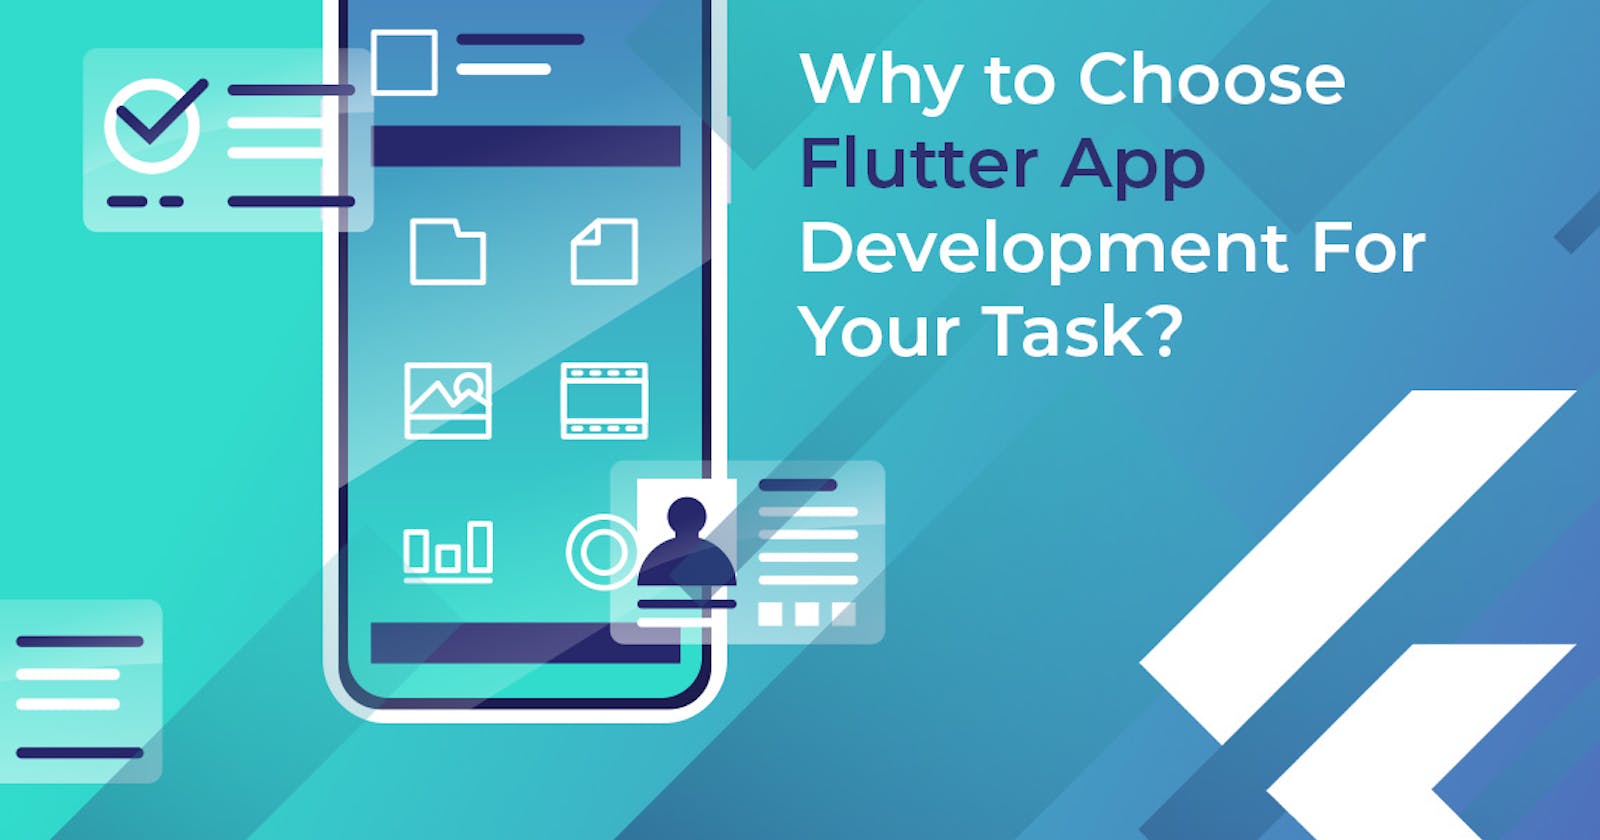 Why to Choose Flutter App Development For Your Task?